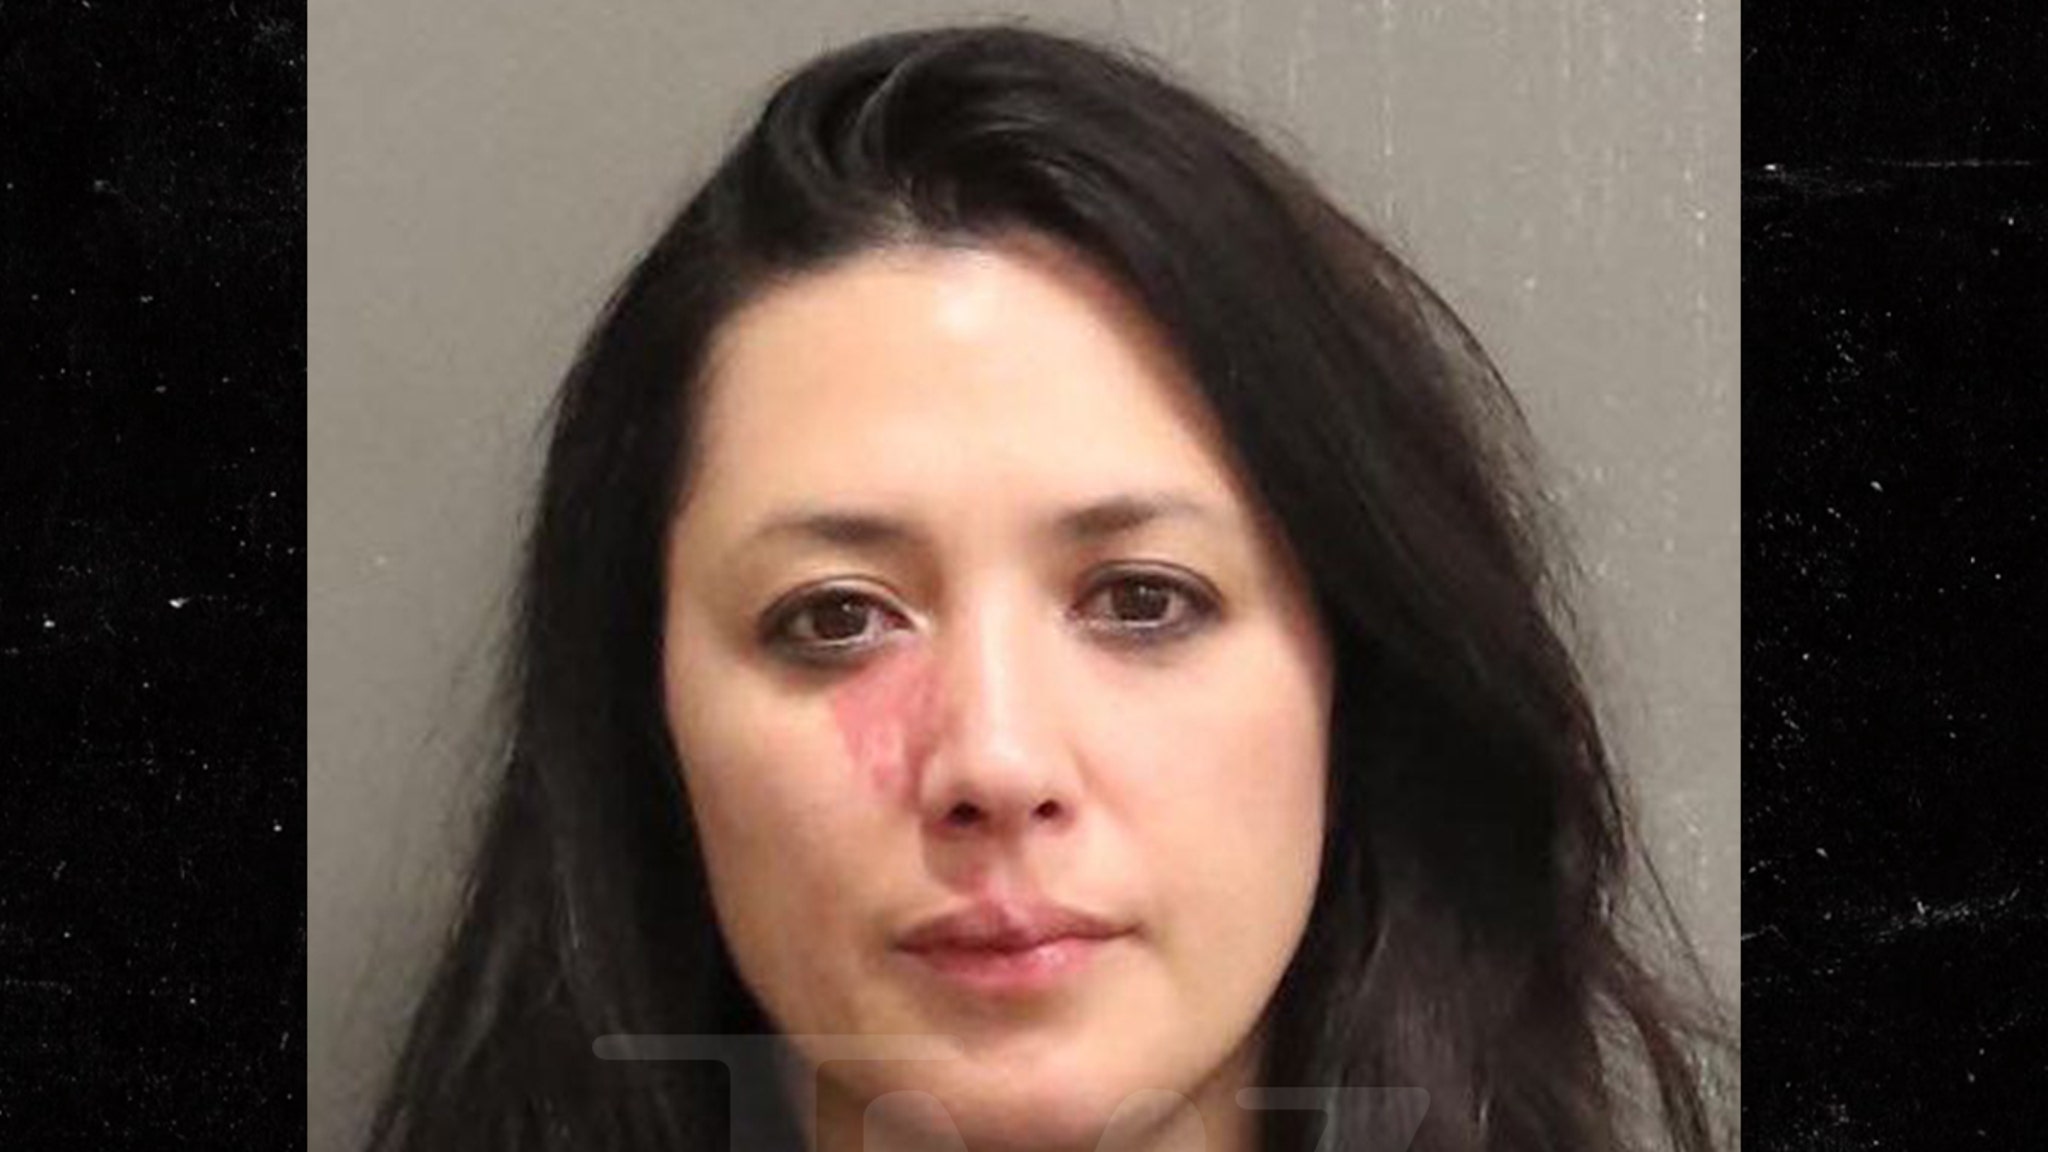 Michelle Branch Arrested for Domestic Assault Amid Split with Husband thumbnail